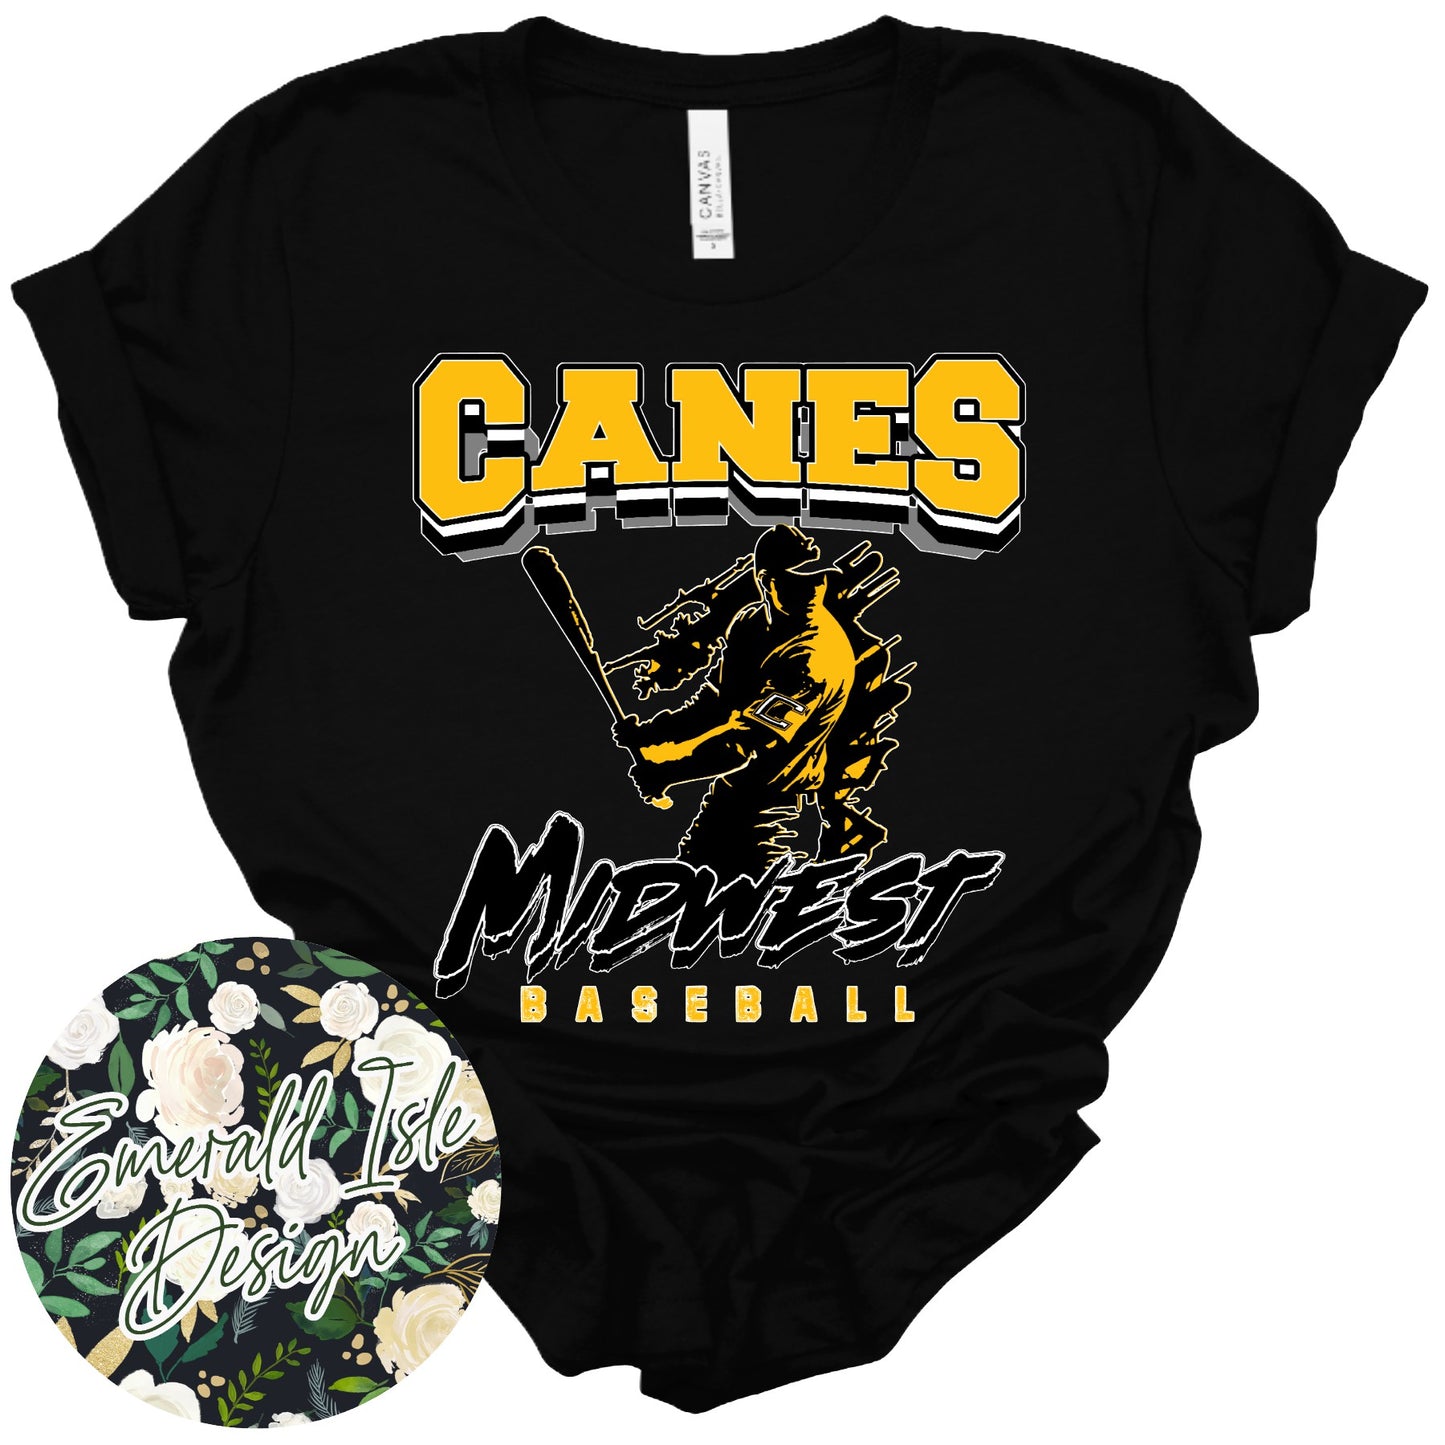 Canes Midwest Baseball Design